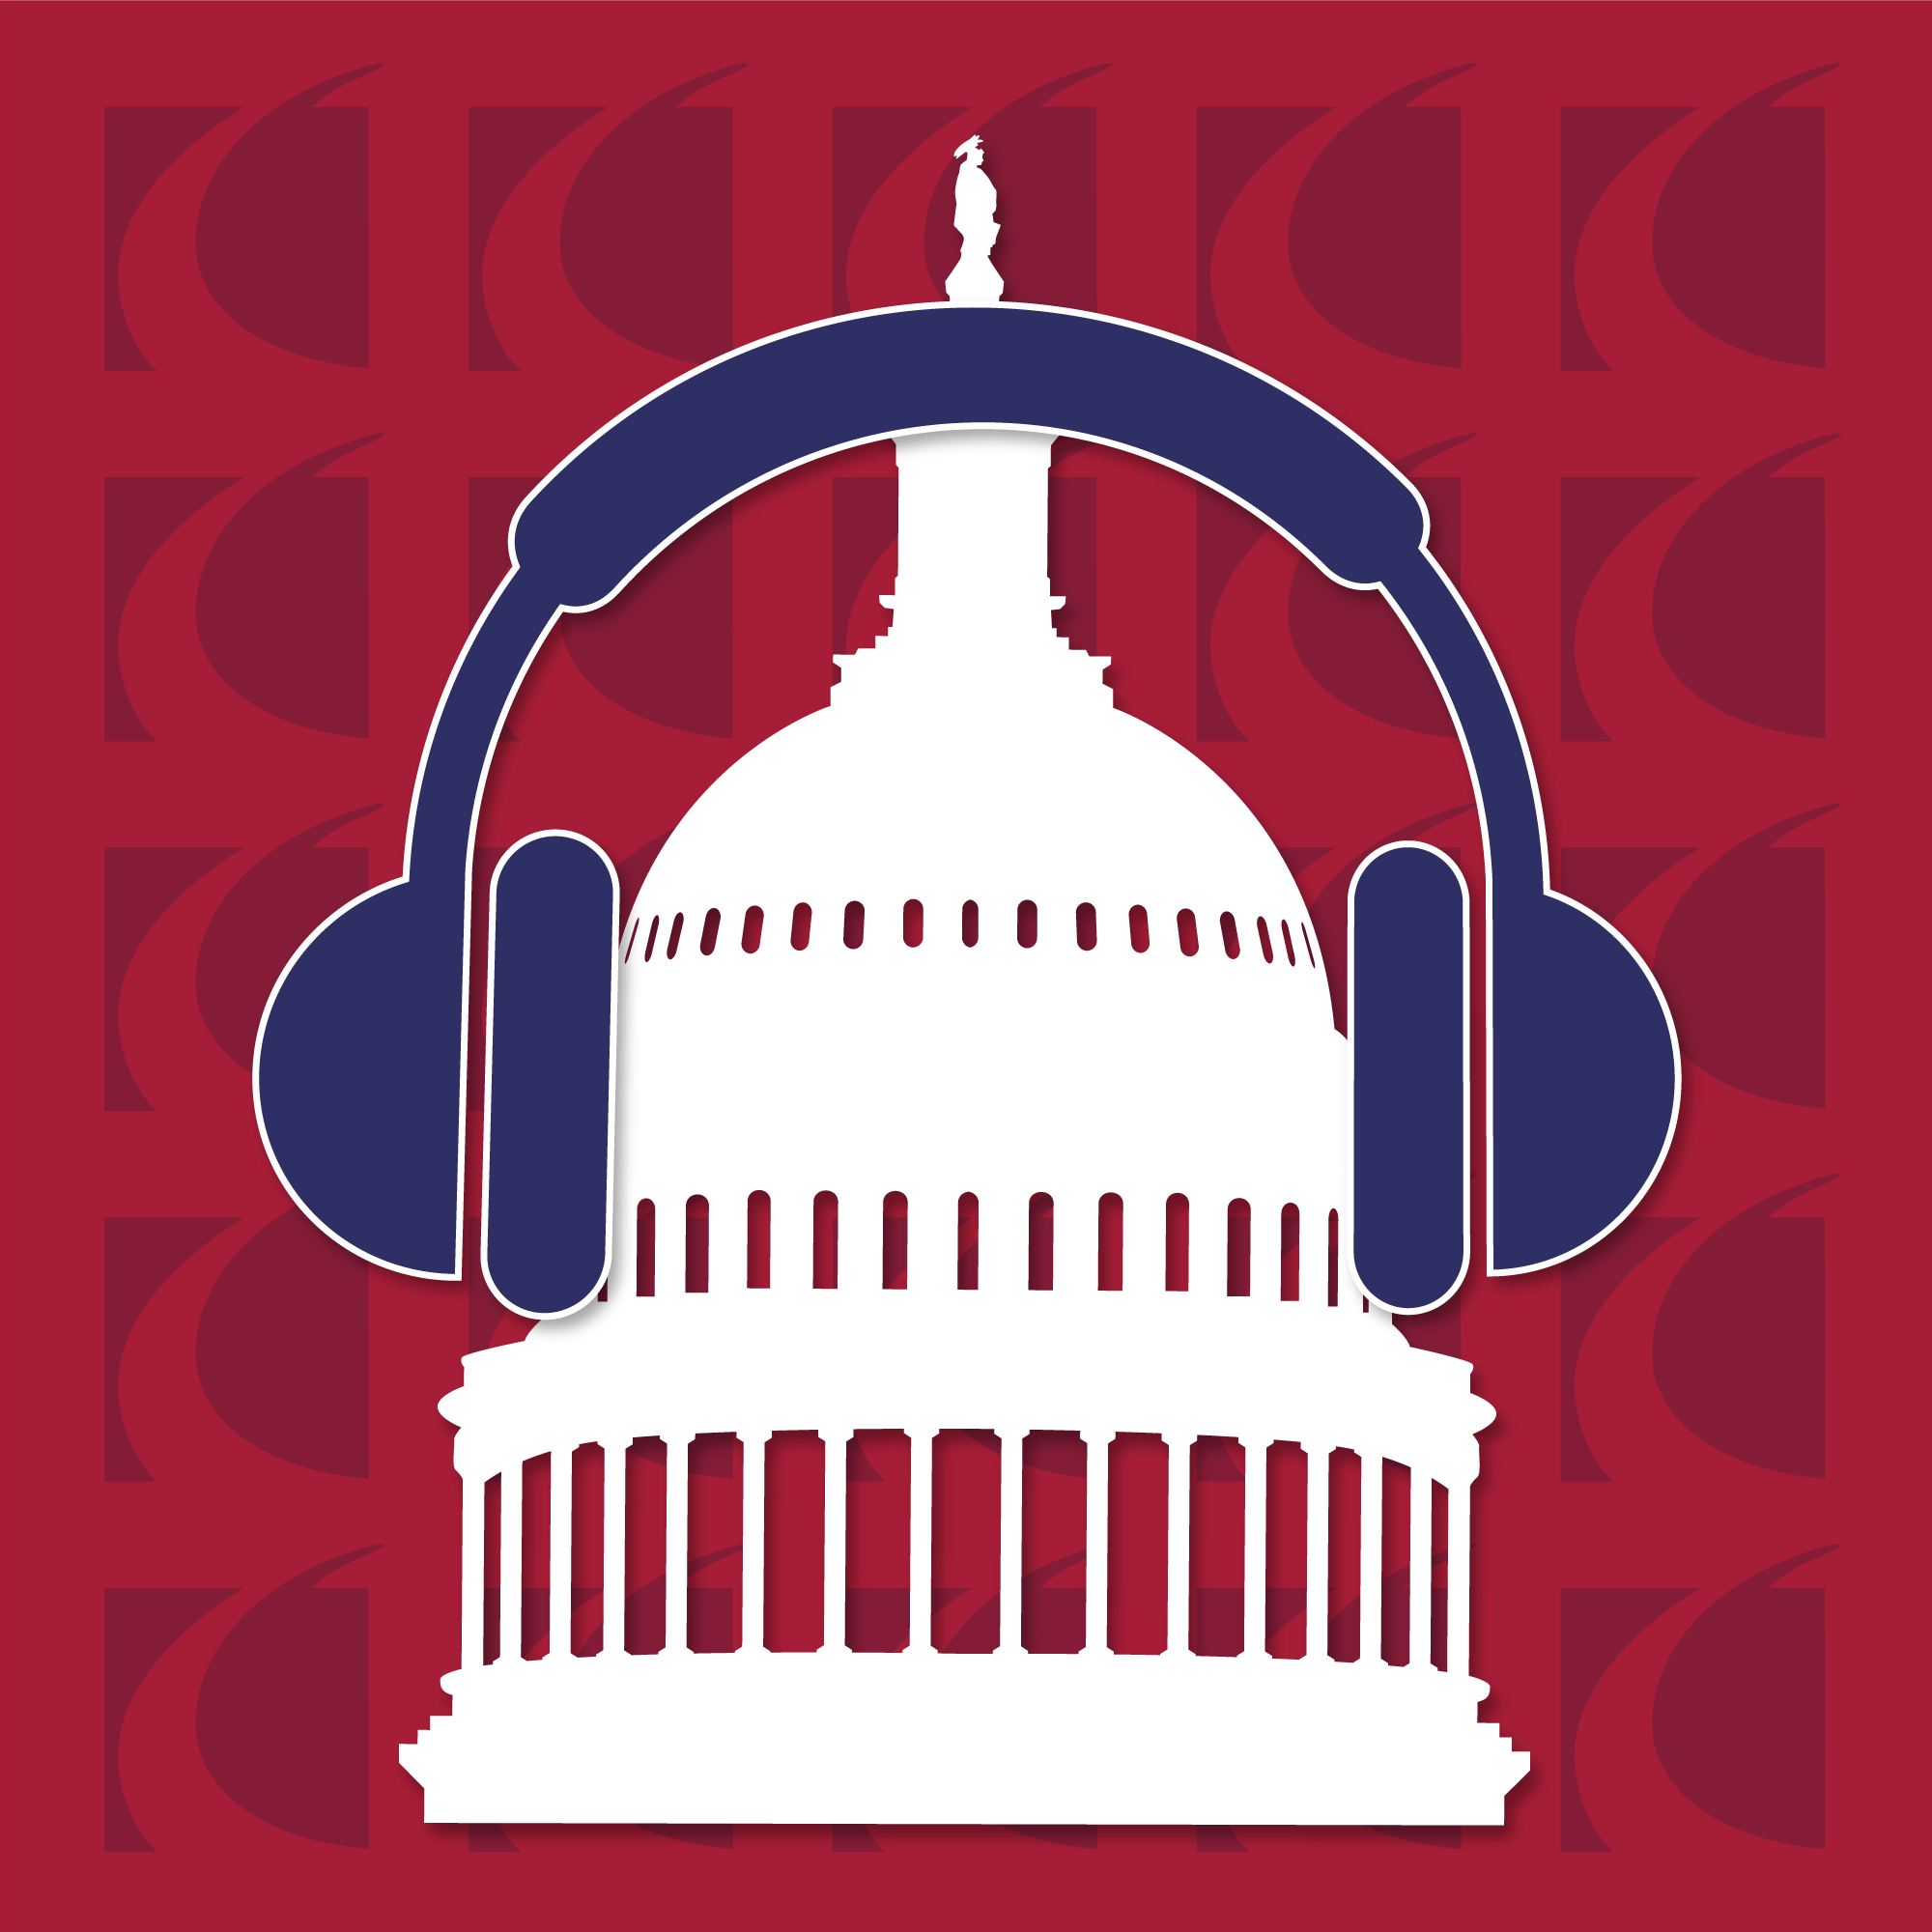 Mar. 17: Fastest 5 Minutes, The Podcast Gov’t Contractors Can’t Do Without - Crowell & Moring LLP